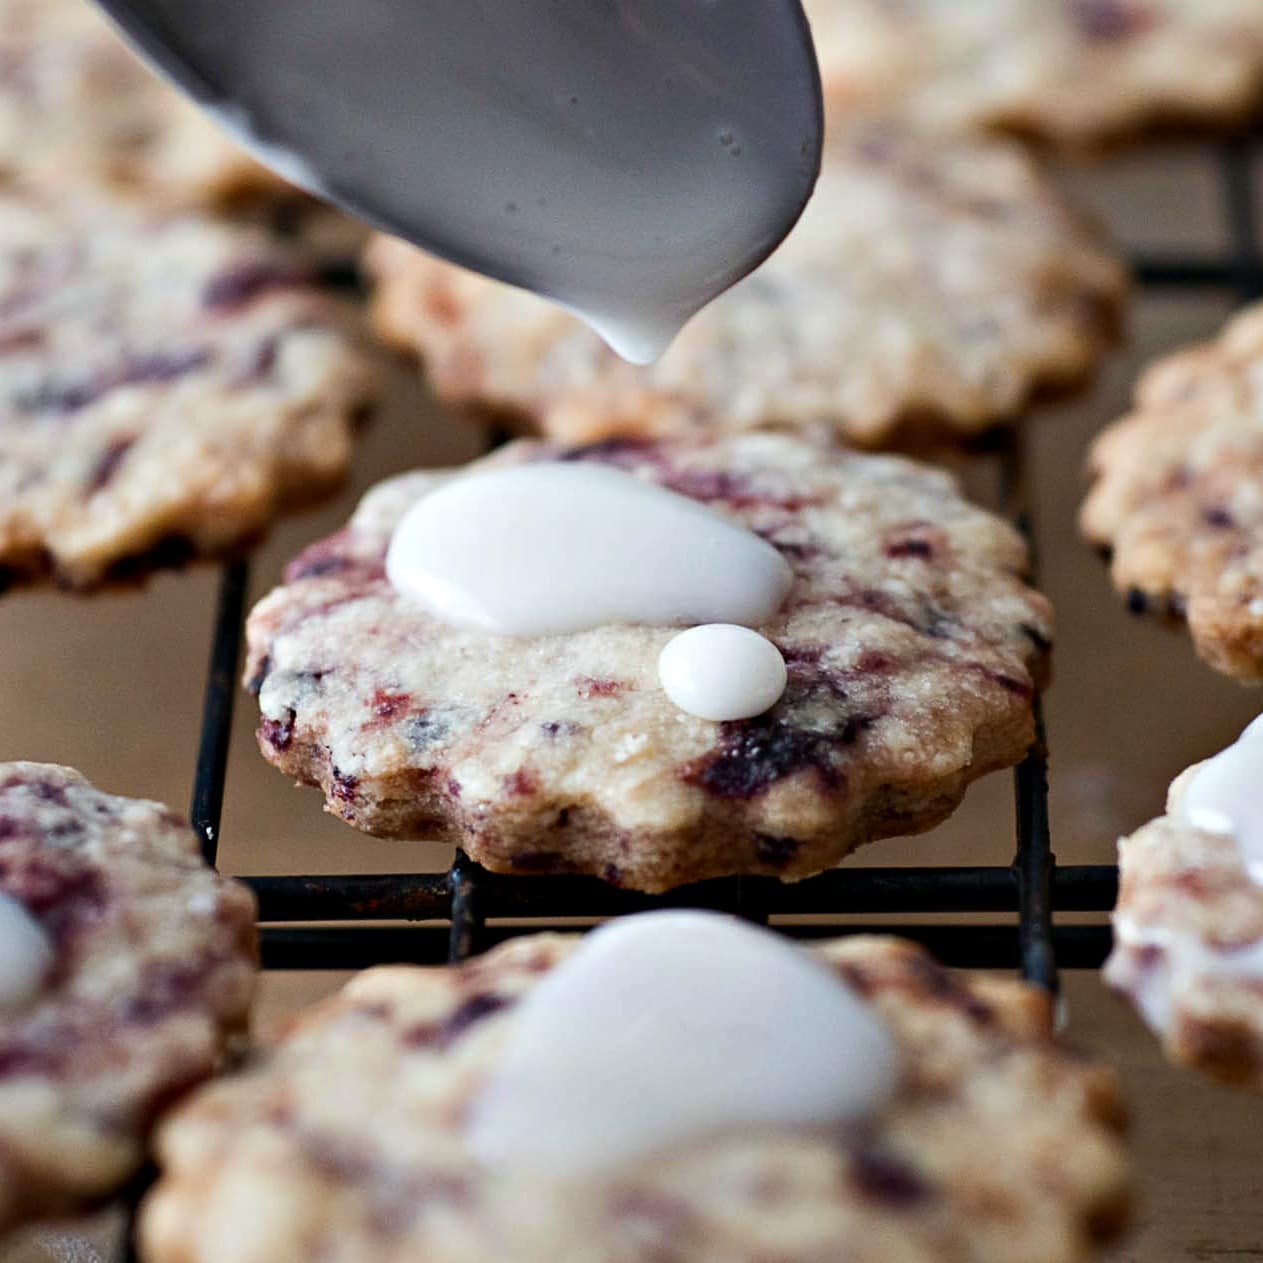 A white icing is being poured onto a rack of cookies.